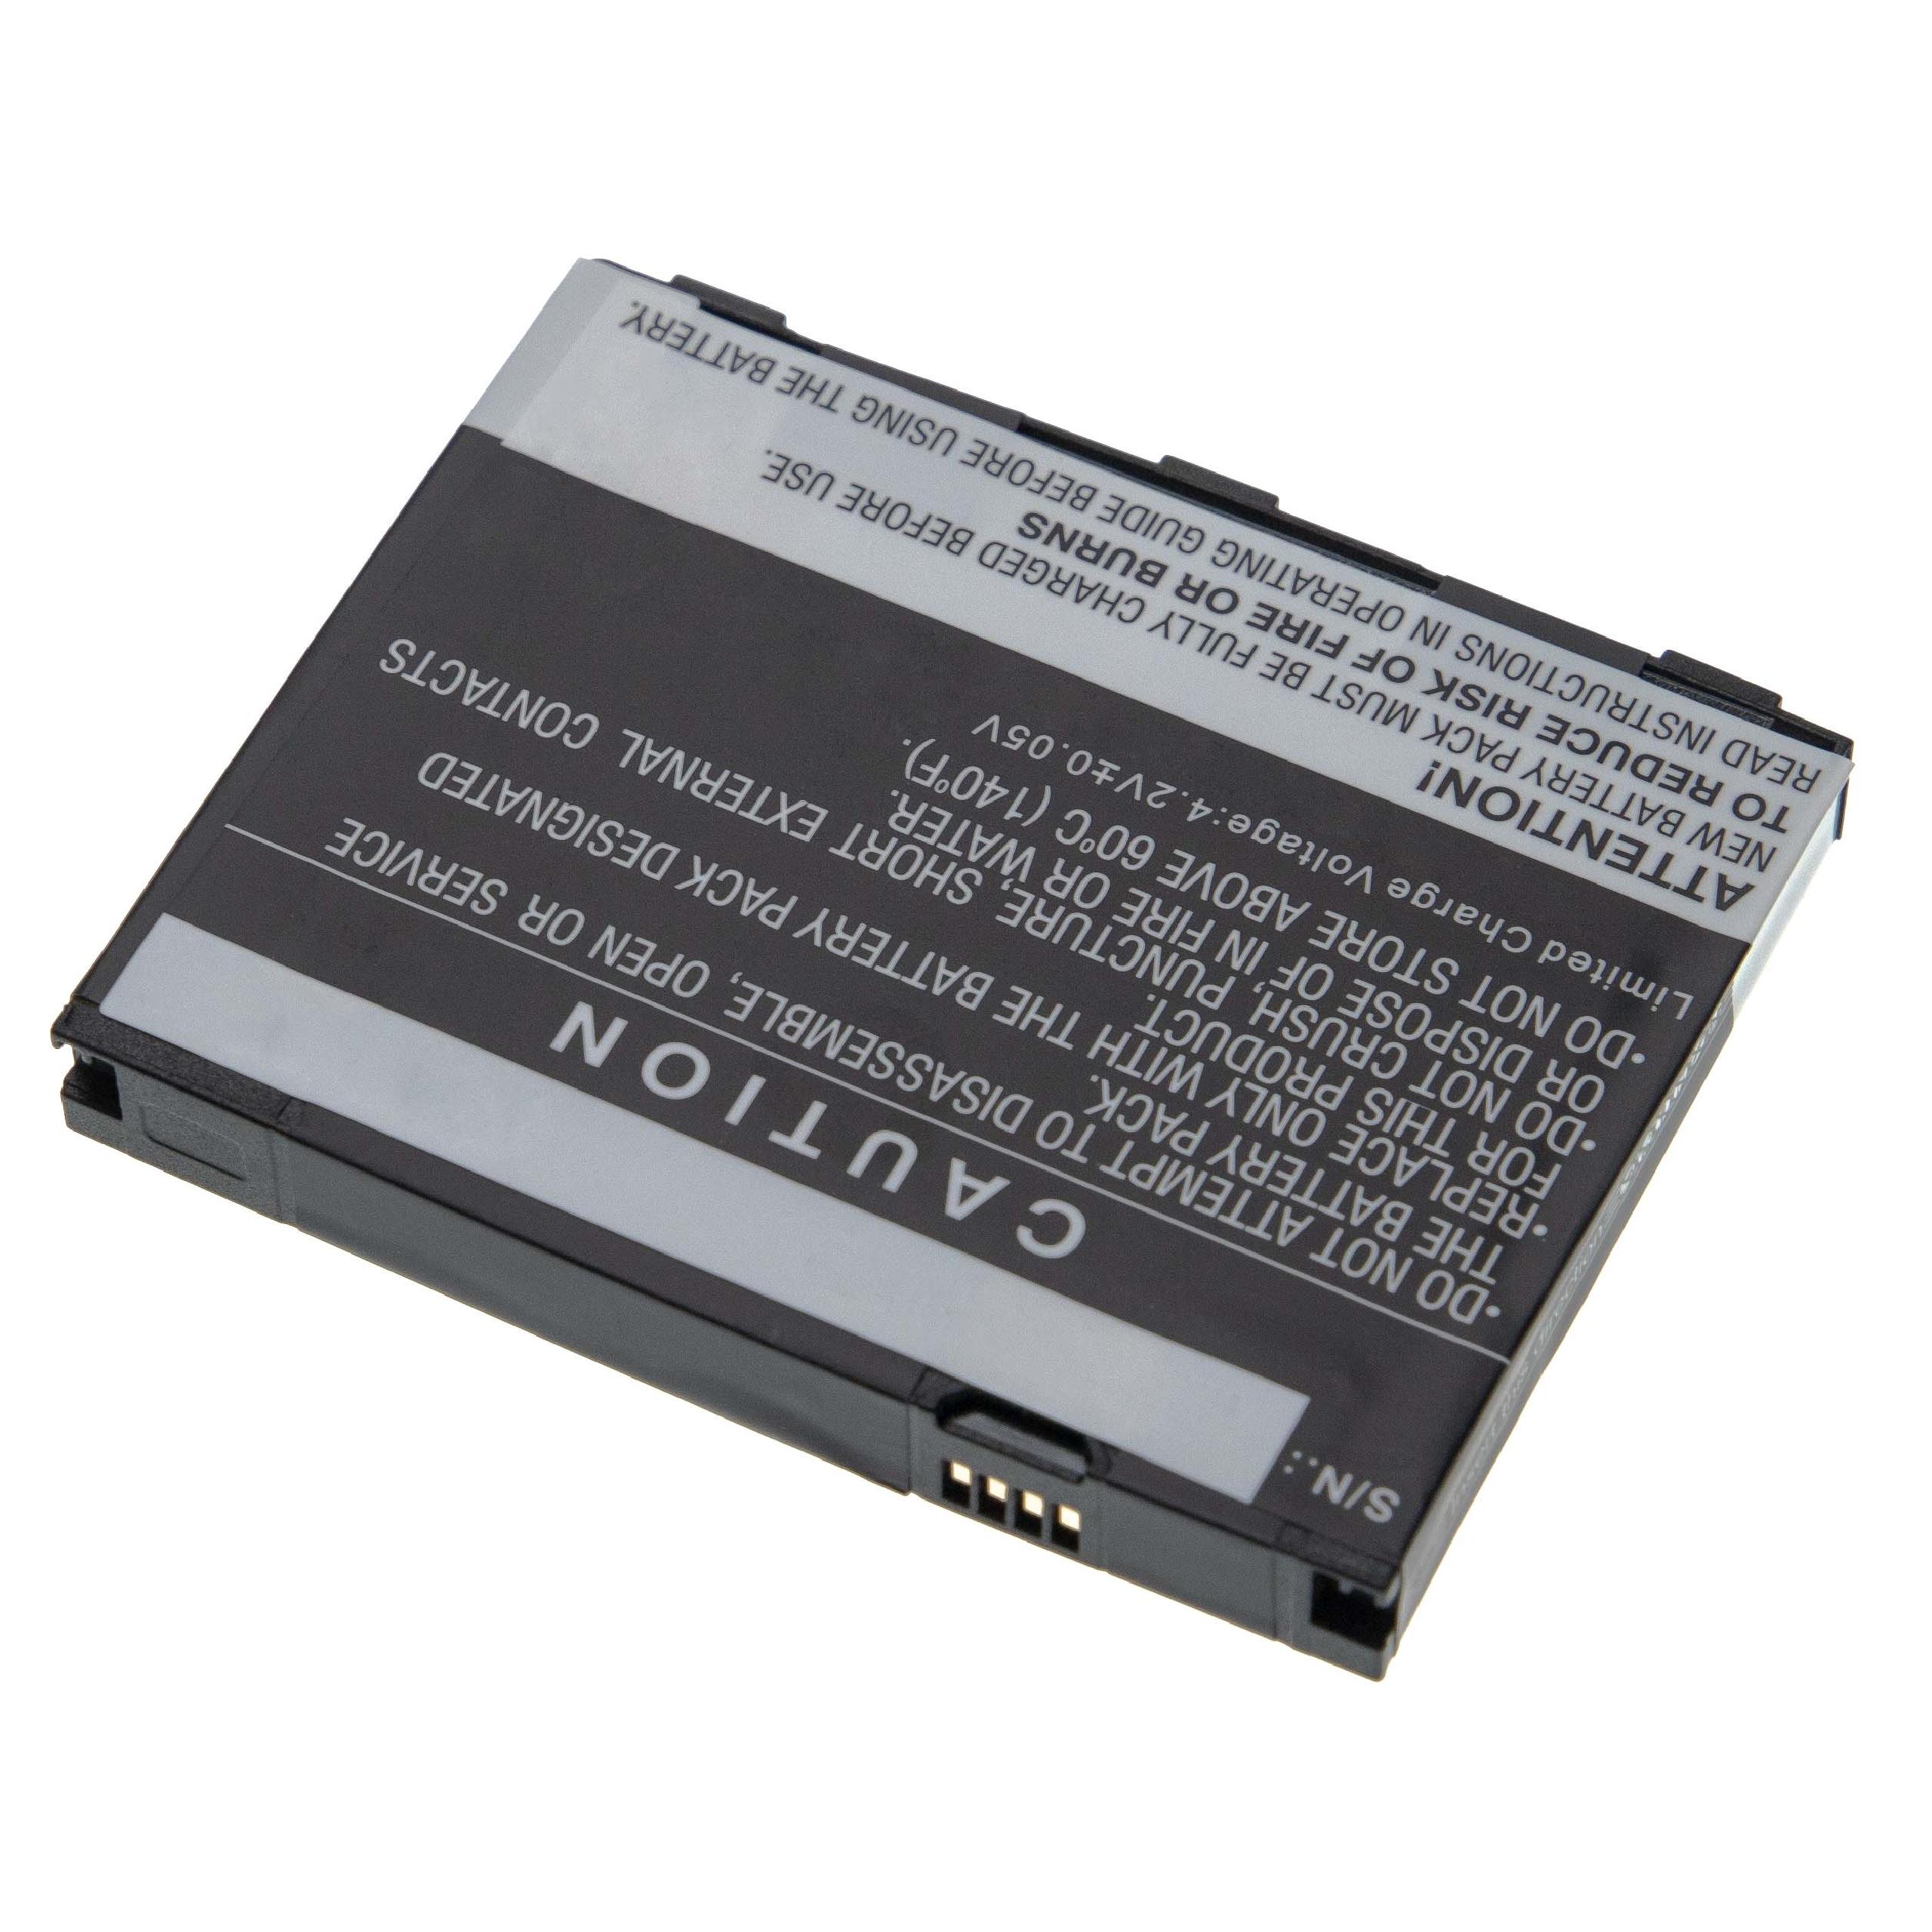 Mobile Router Battery Replacement for Netgear W-10, 308-10019-01 - 5000mAh 3.7V Li-polymer